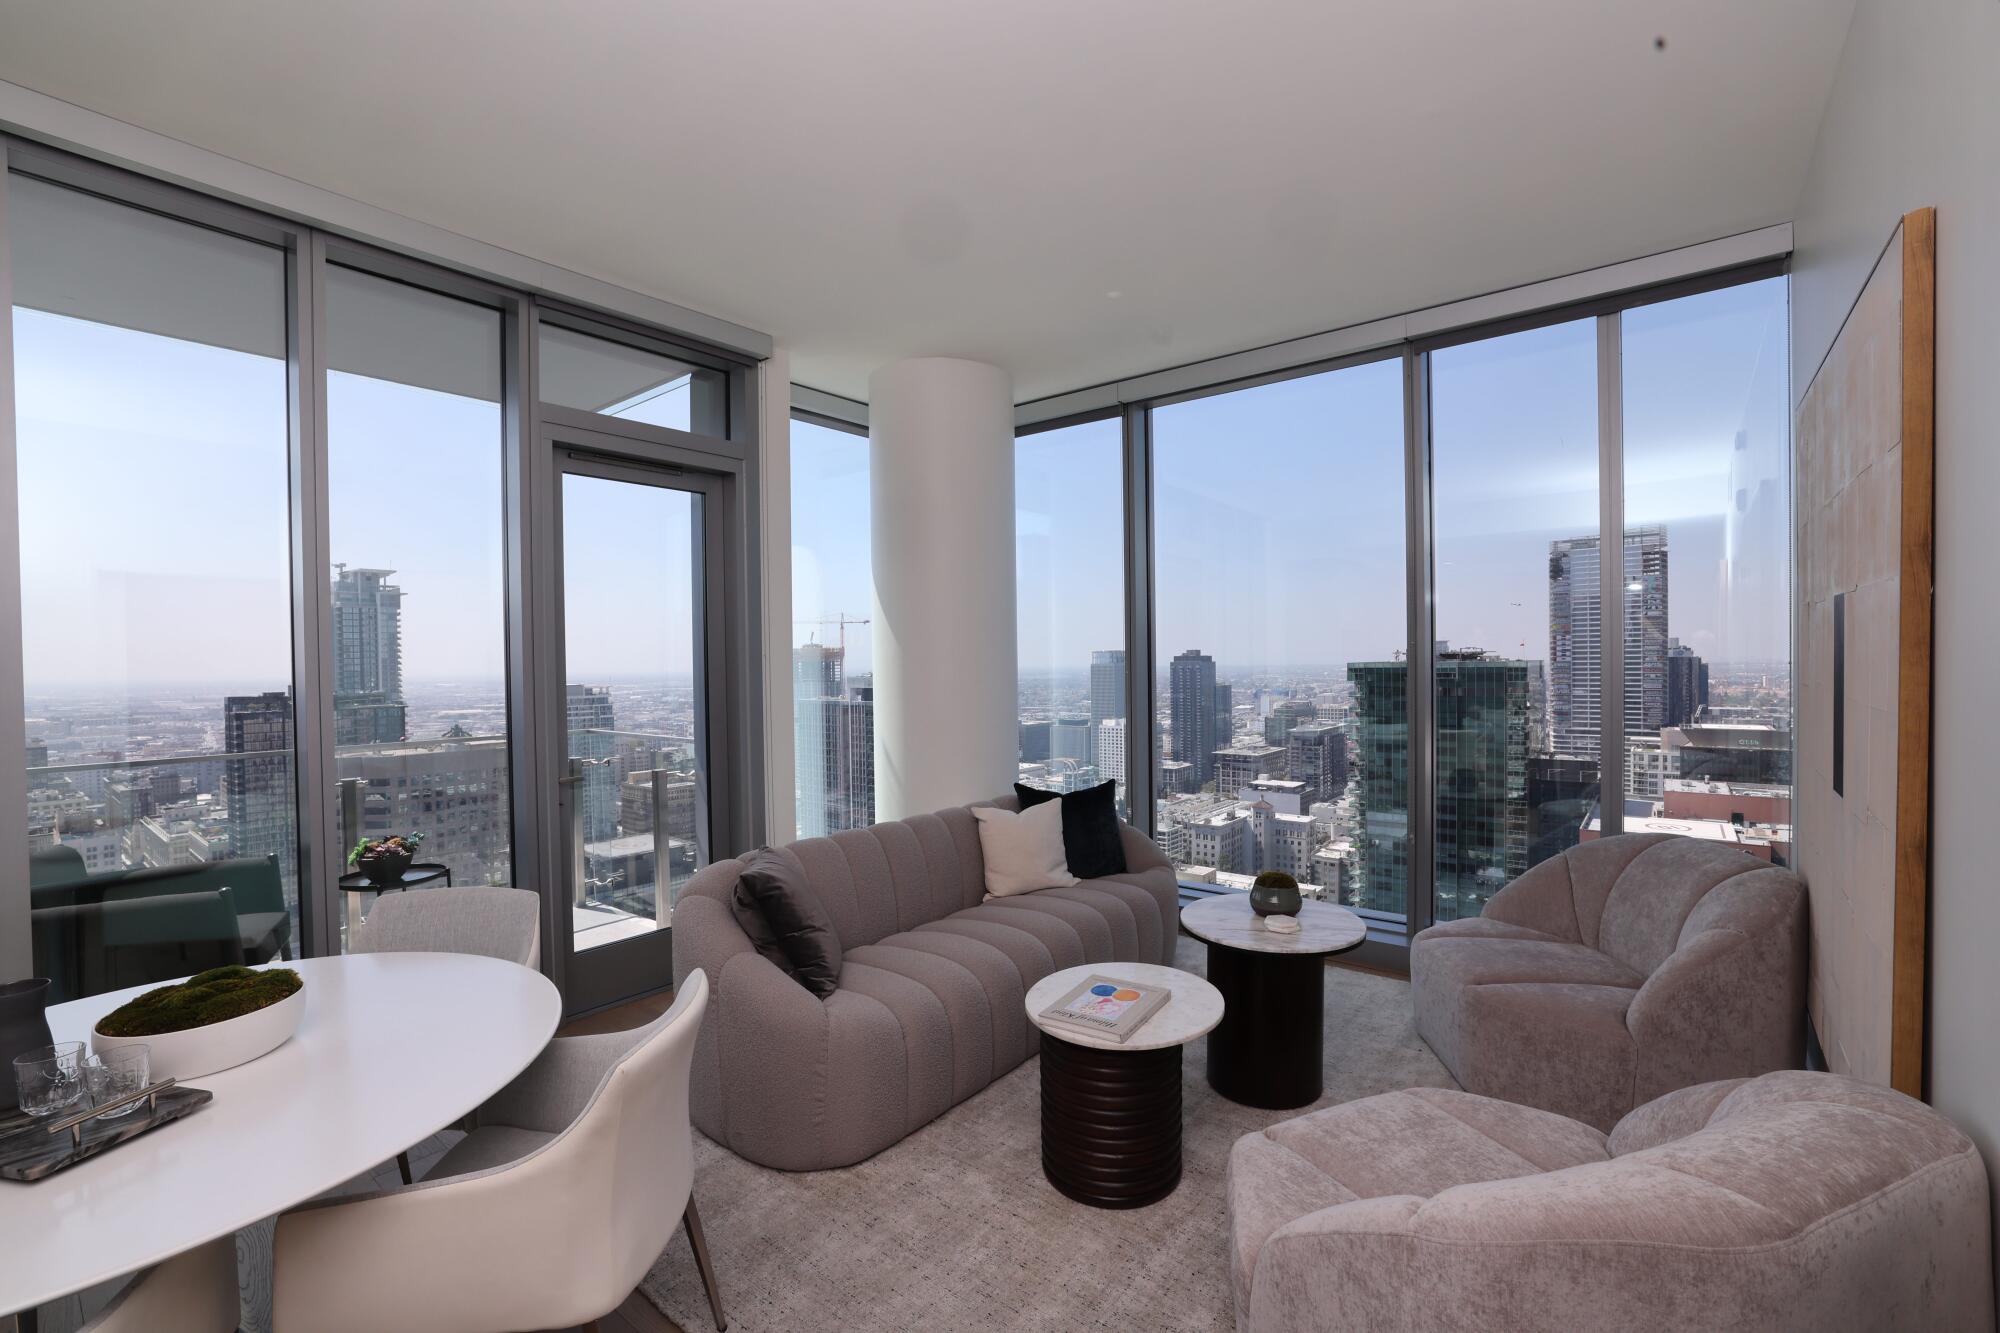 Figueroa Eight, a 41-story apartment tower, recently opened in downtown LA.